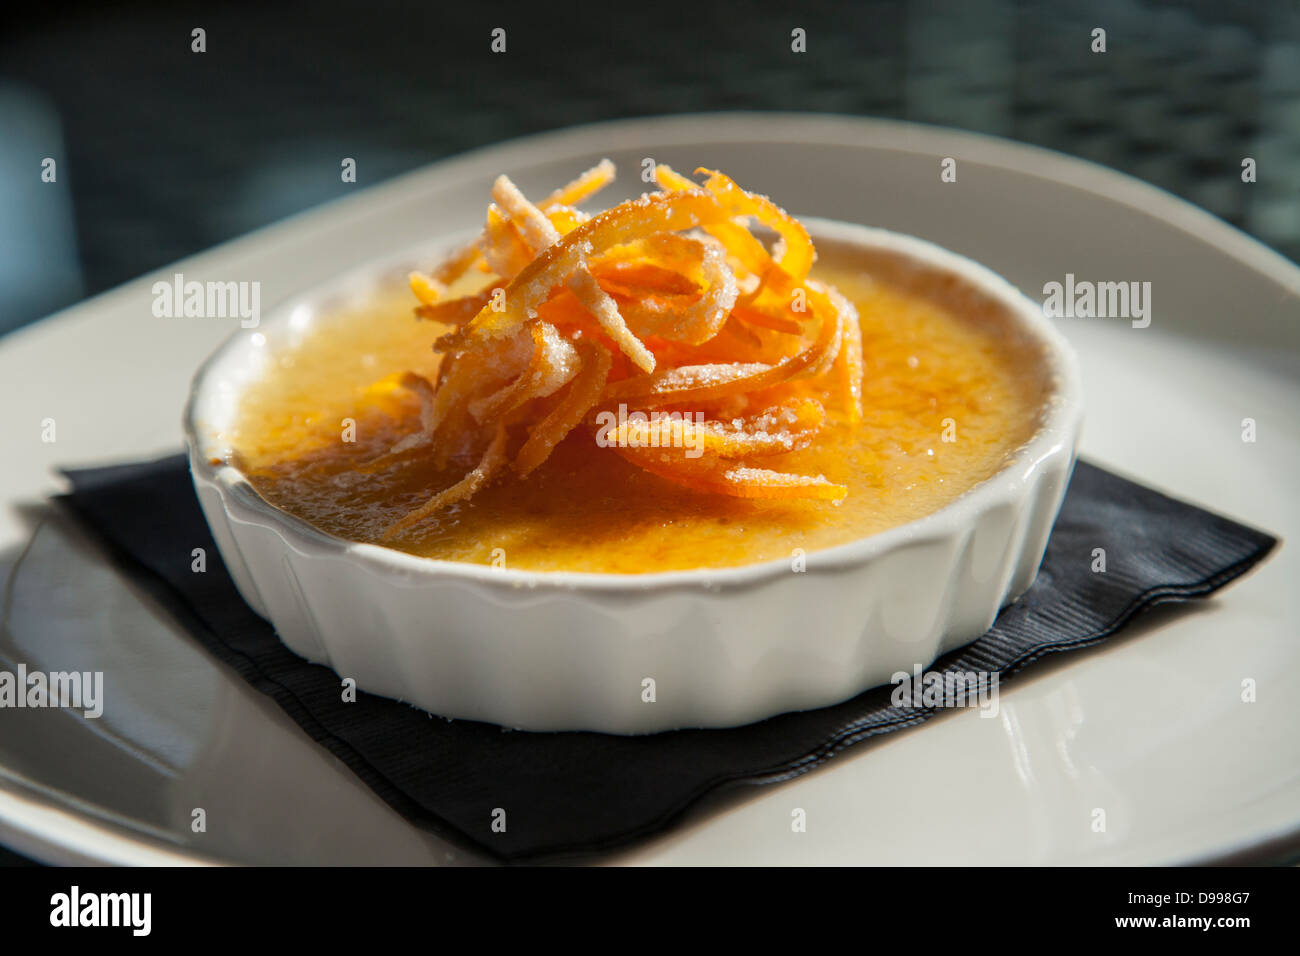 single serving of cream brulee topped with orange Stock Photo